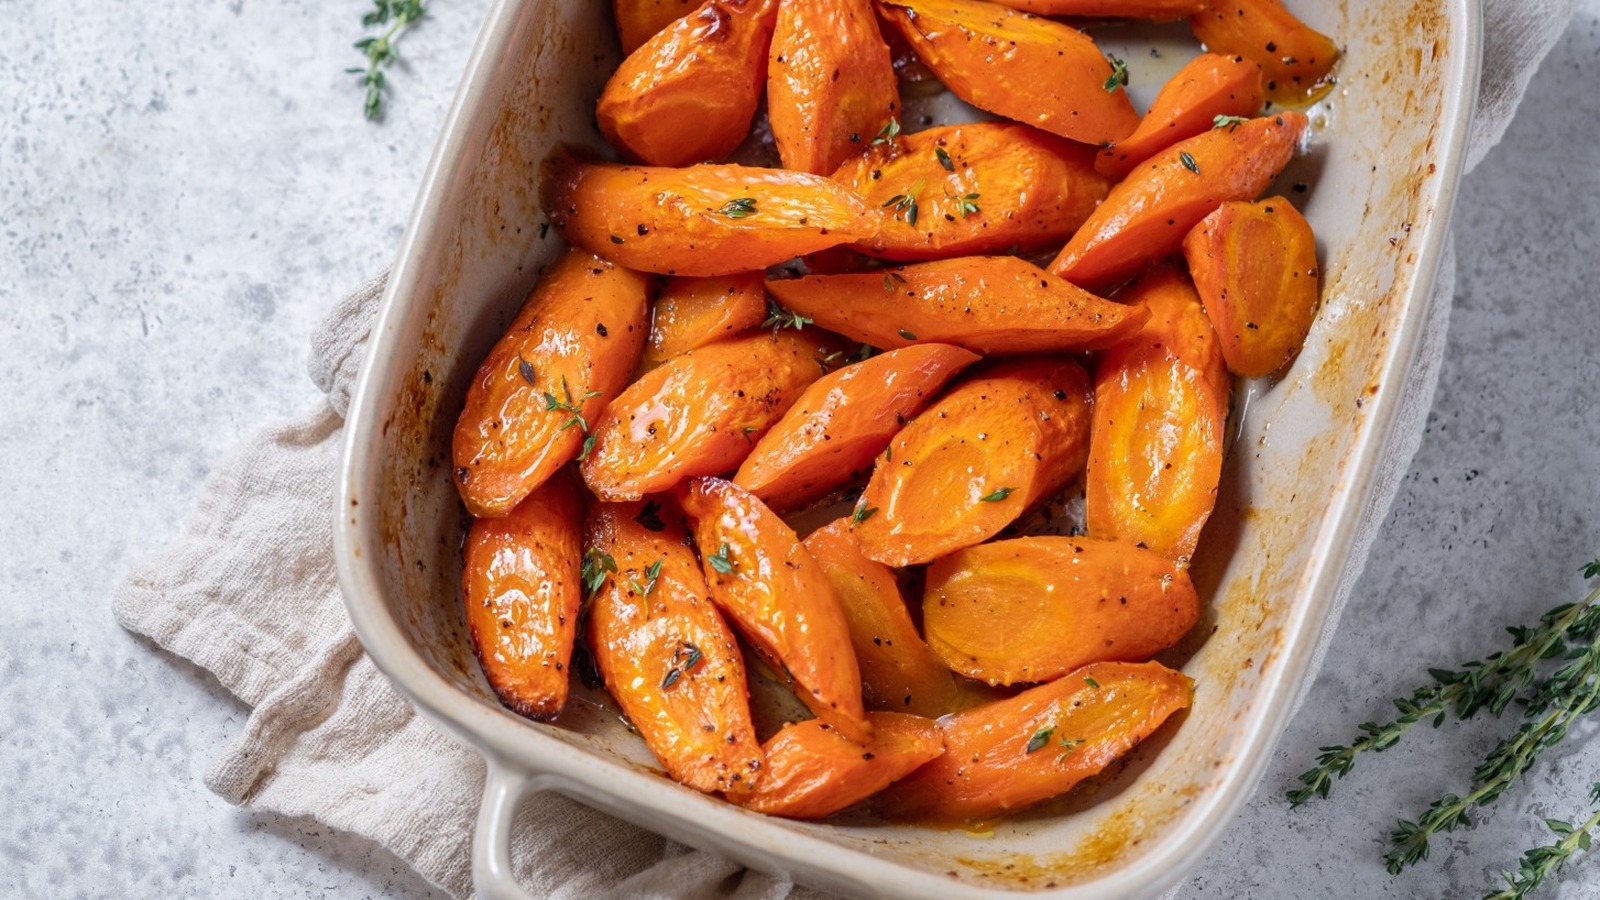 https://www.tastingtable.com/img/gallery/14-tips-you-need-when-cooking-with-carrots/l-intro-1672241703.jpg